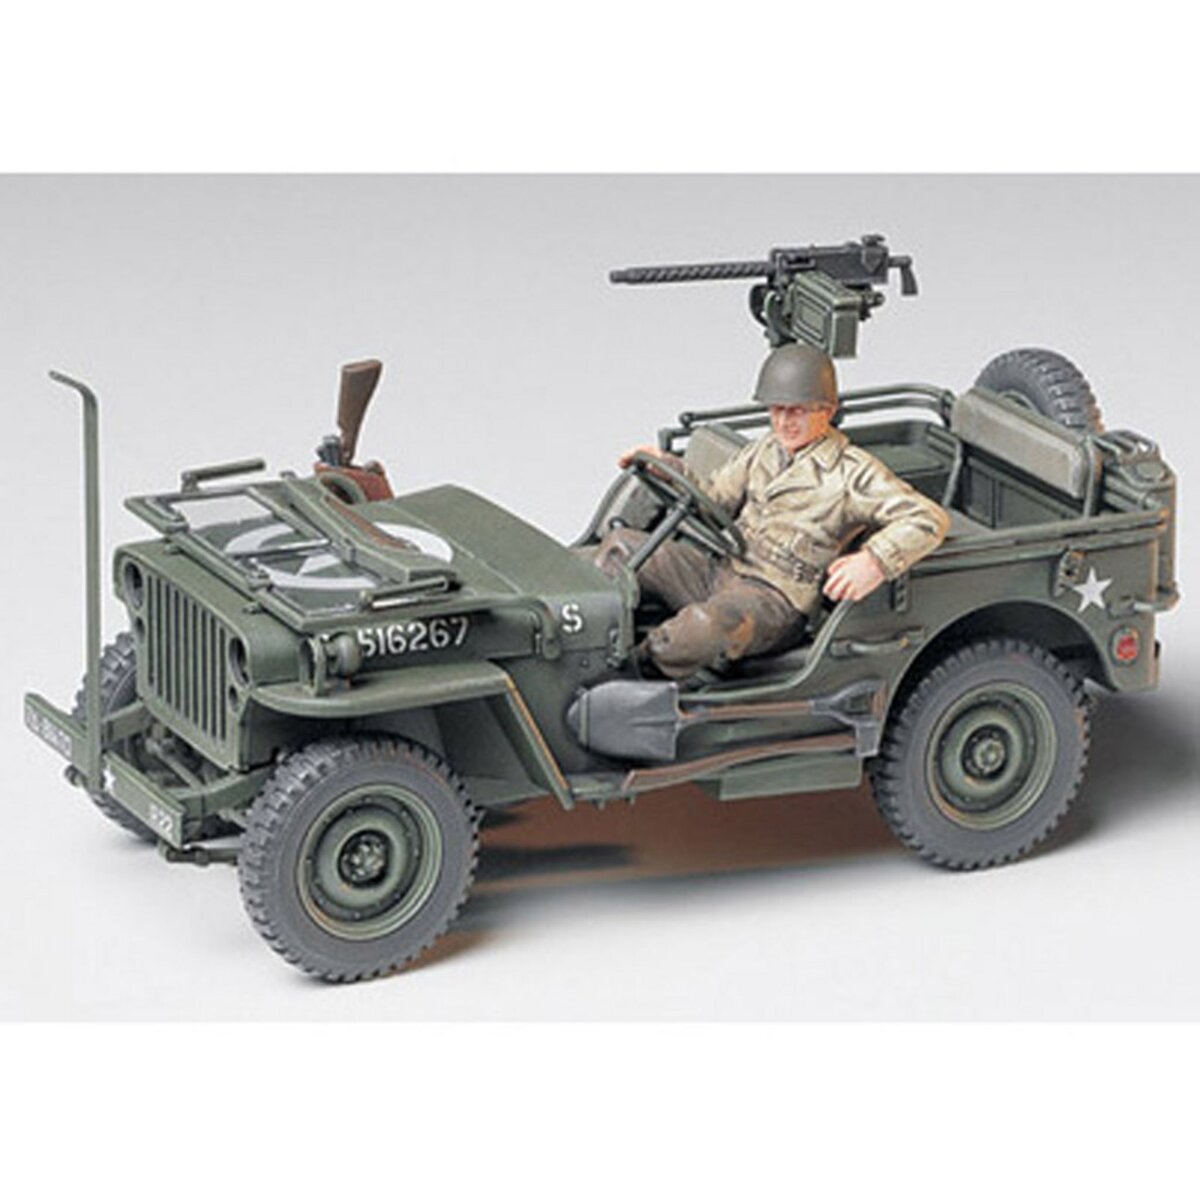 Tamiya Maquette véhicule militaire : Jeep Willys 1/4 Ton pas cher 